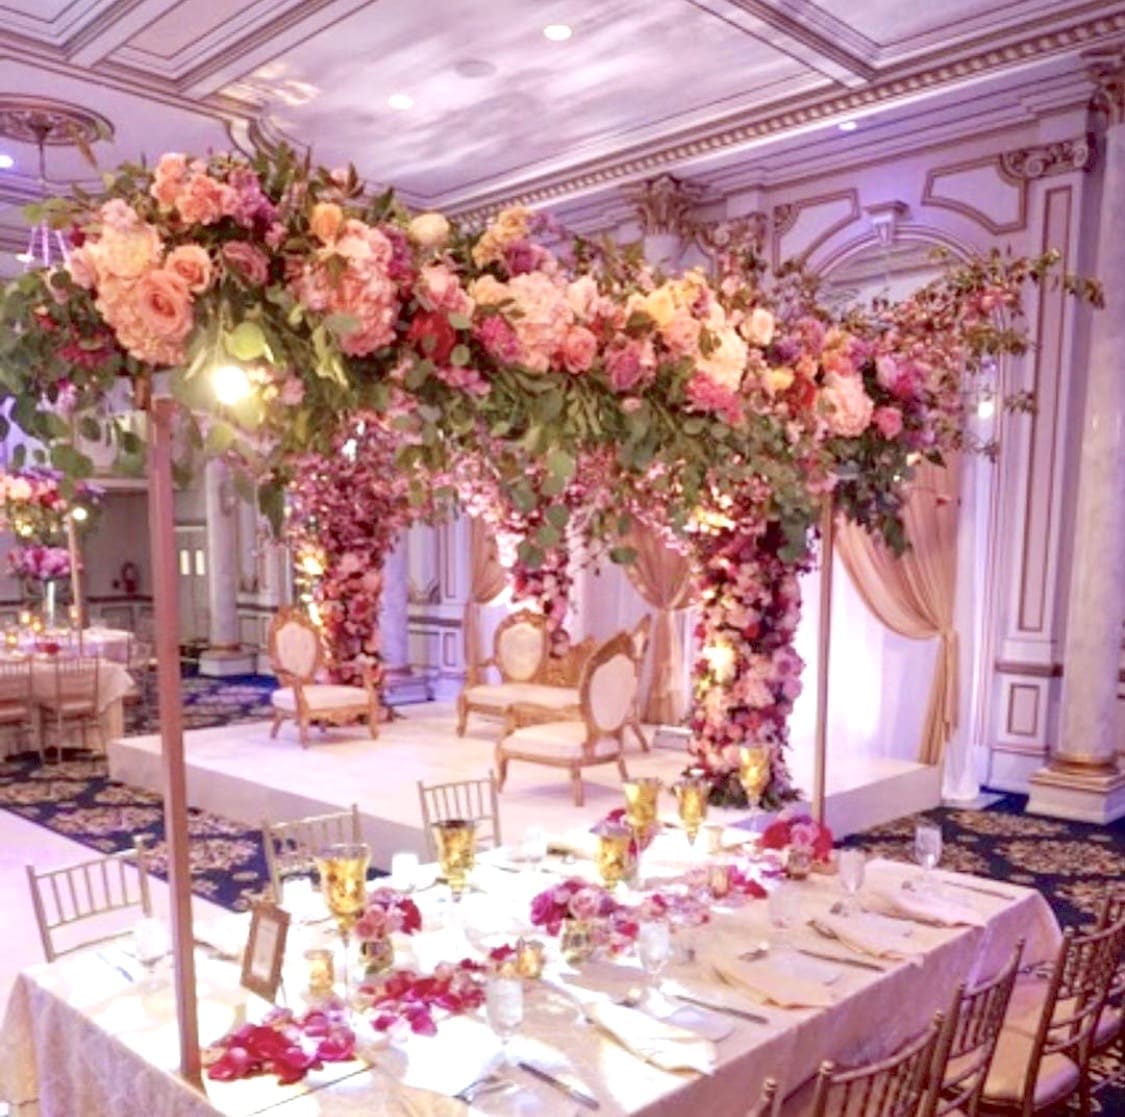 A wedding reception set up with a beautiful tablescape of pink and white flowers.